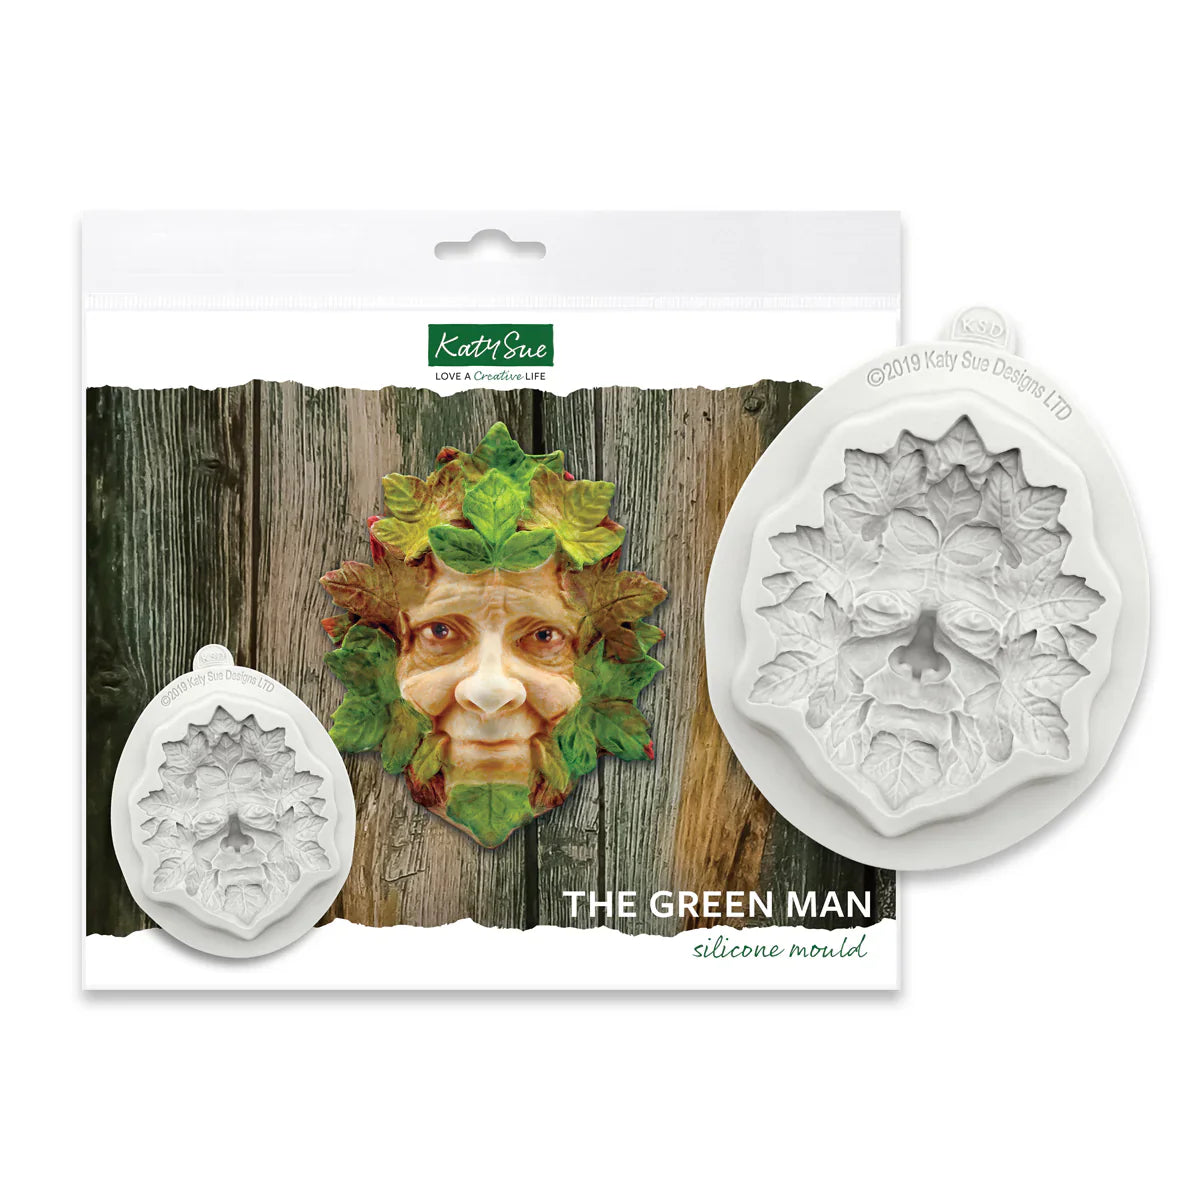 The Green Man Silicone Mould